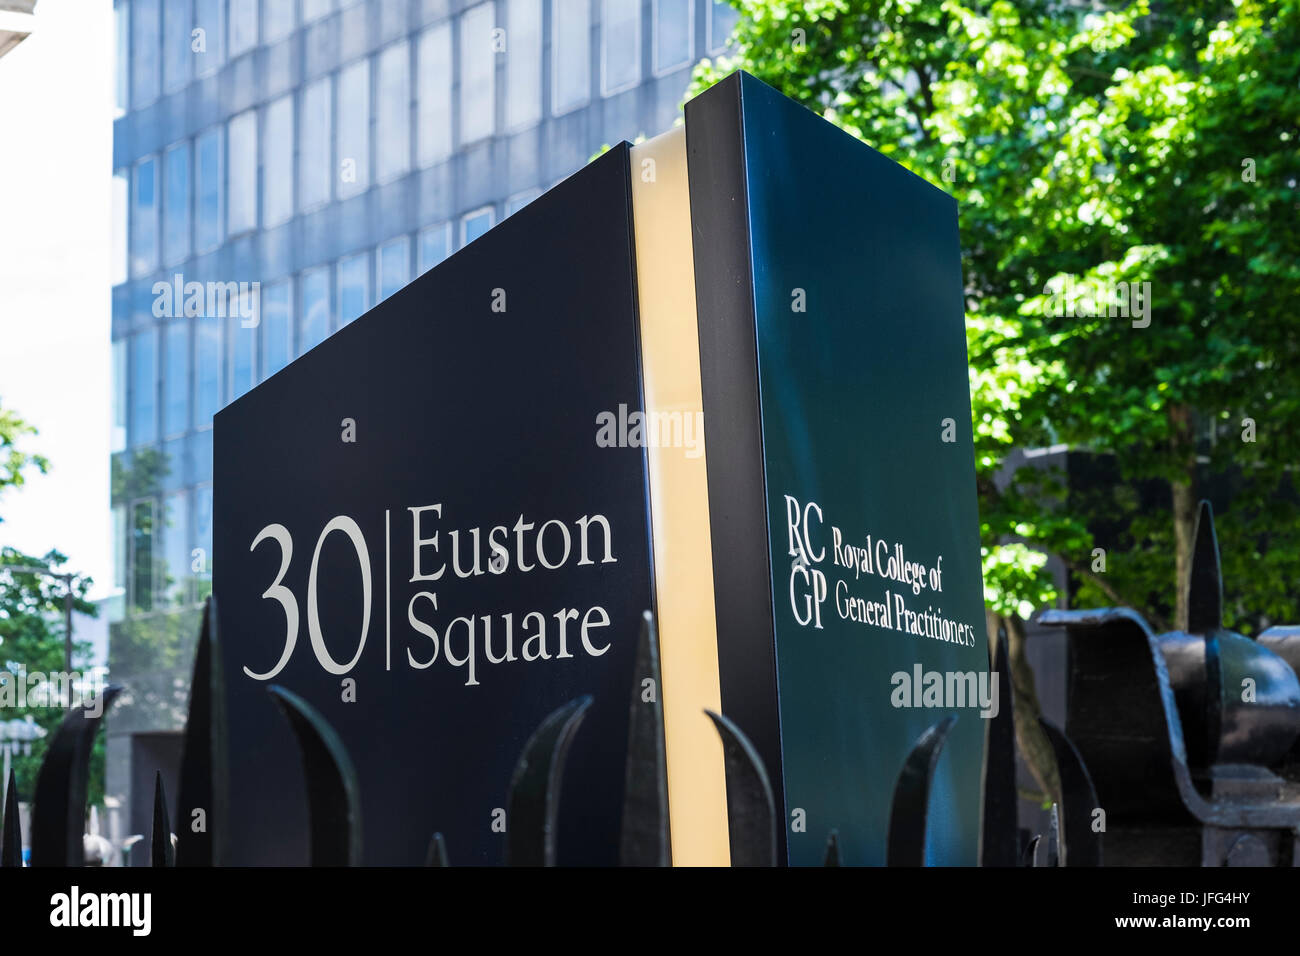 30 Euston Square is the home of the Royal College of General Practioners, London, England, u.k. Stock Photo